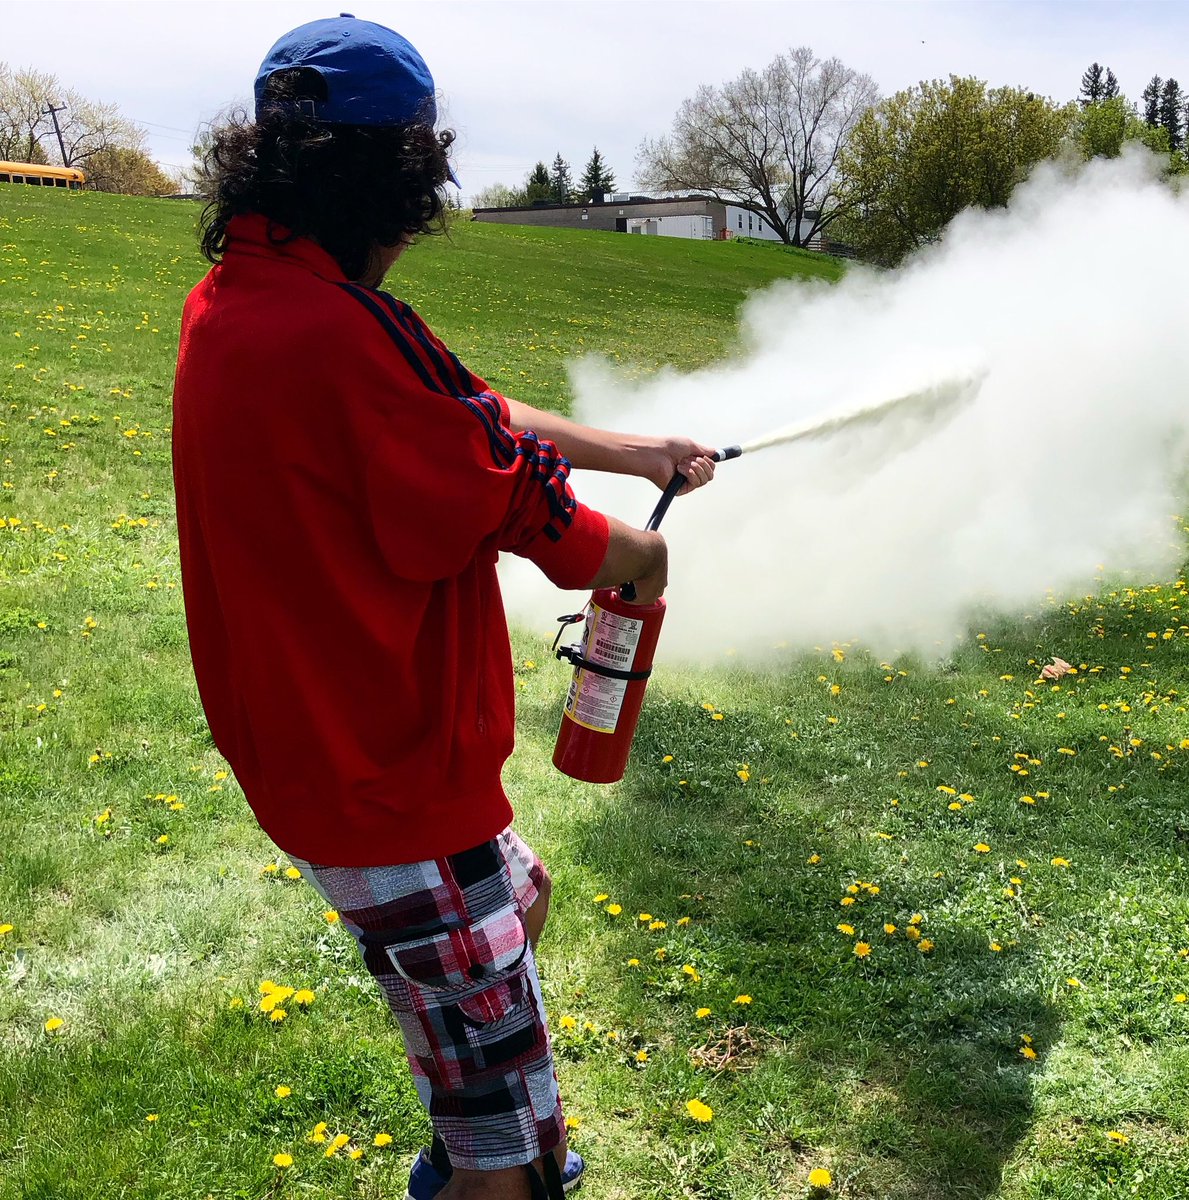 We had a blast yesterday, with some more Fire Safety & Extinguisher Training with some local schools in the GTA!🧯💨 #firehousetraining #workplacesafety #evcuationwardenclass #safetytraining #fireprevention #firesafetyplan #inspection #fireextinguishertraining